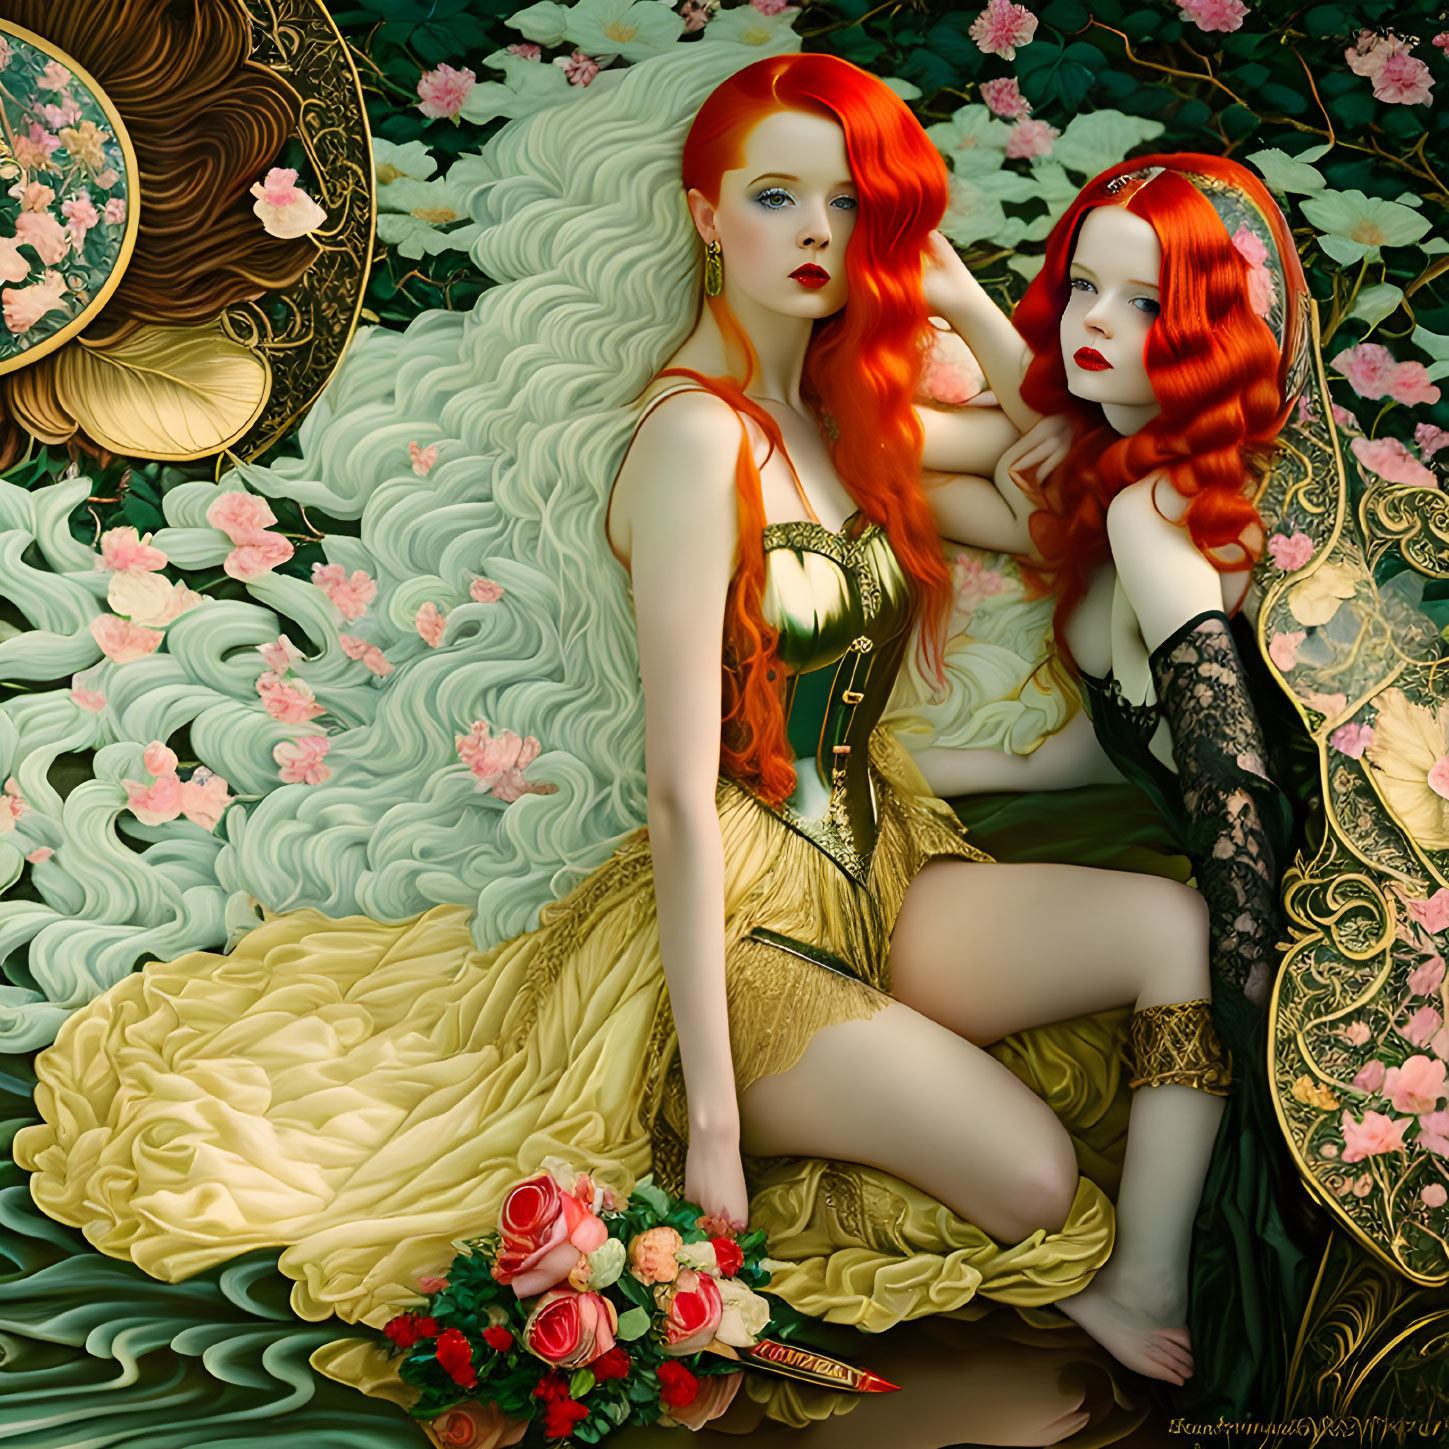 Stylized women with vibrant red hair in fantastical floral setting